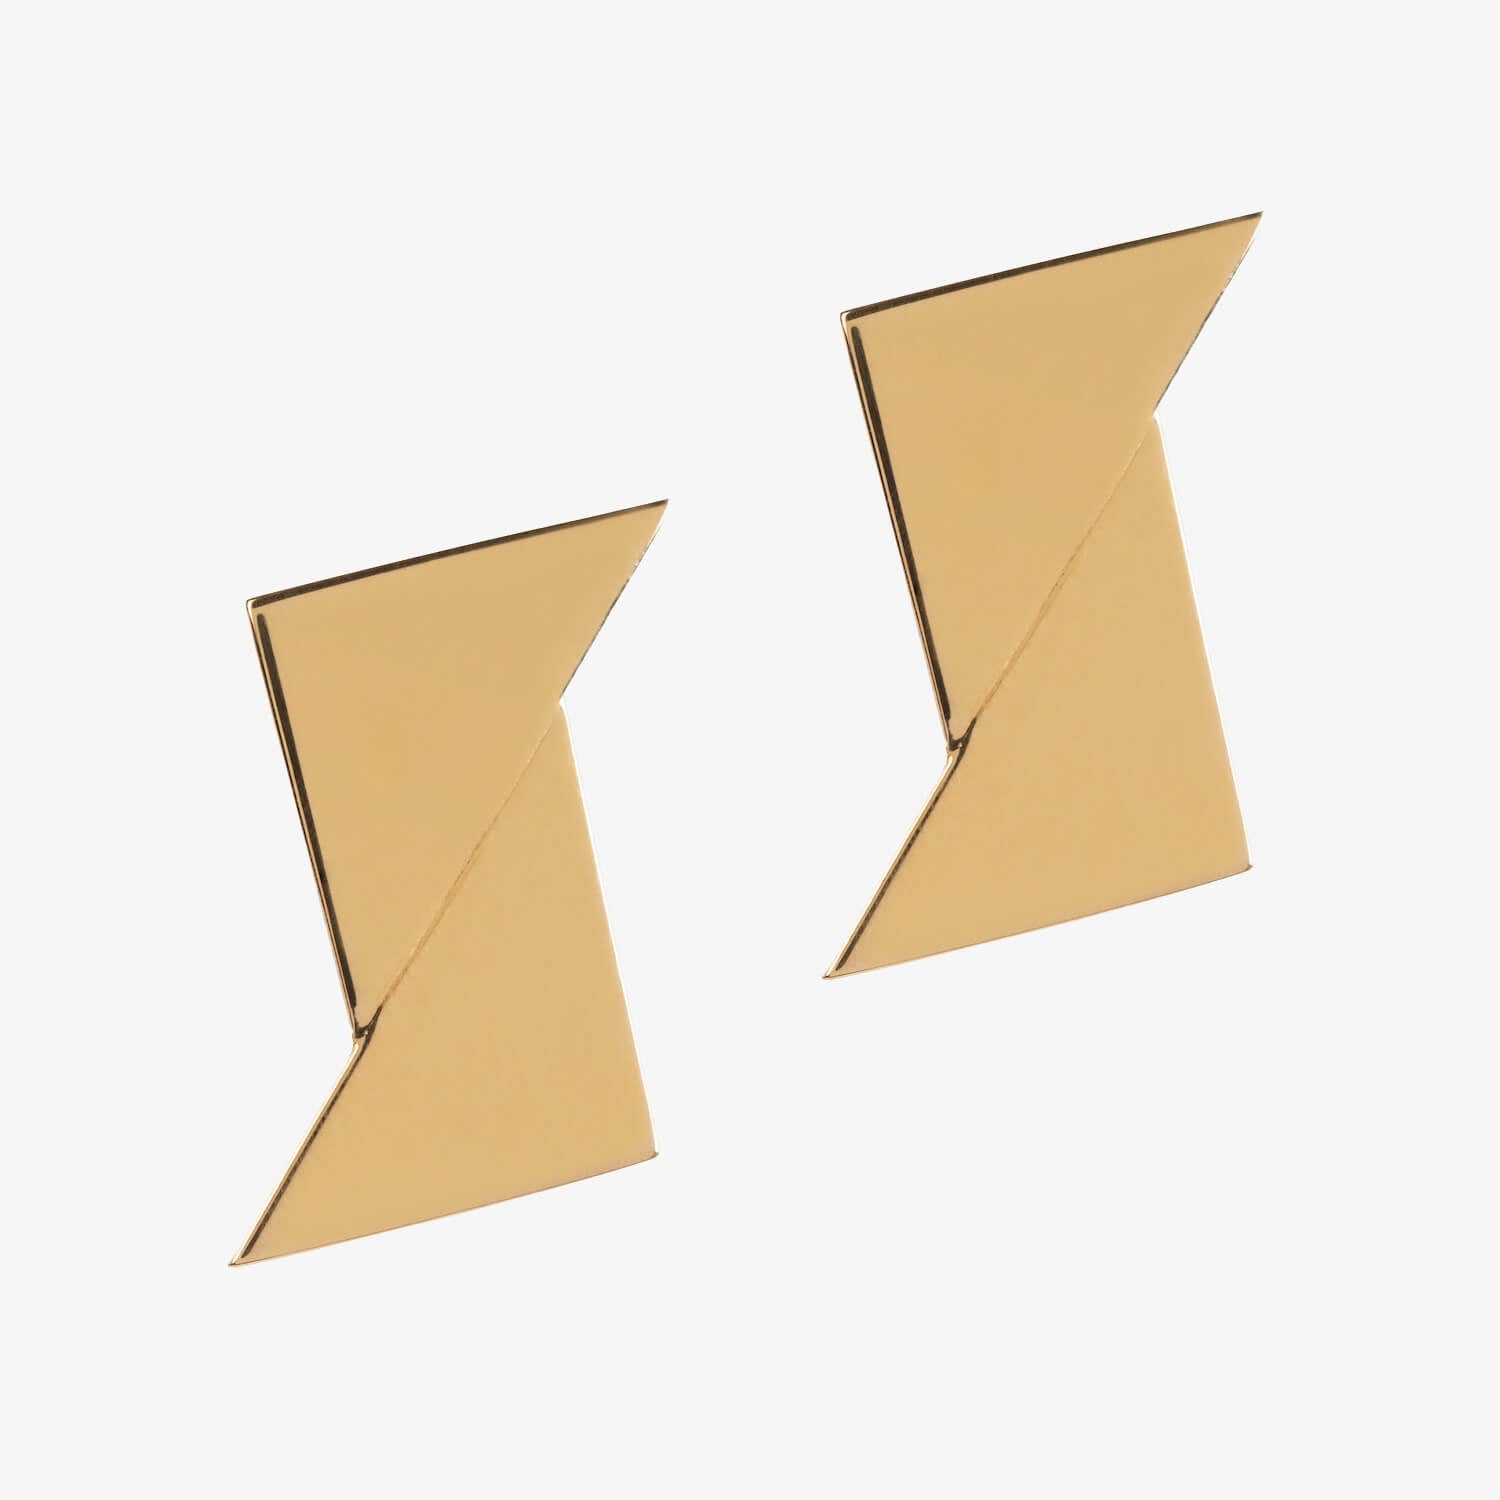 Union Triangles Studs Gold